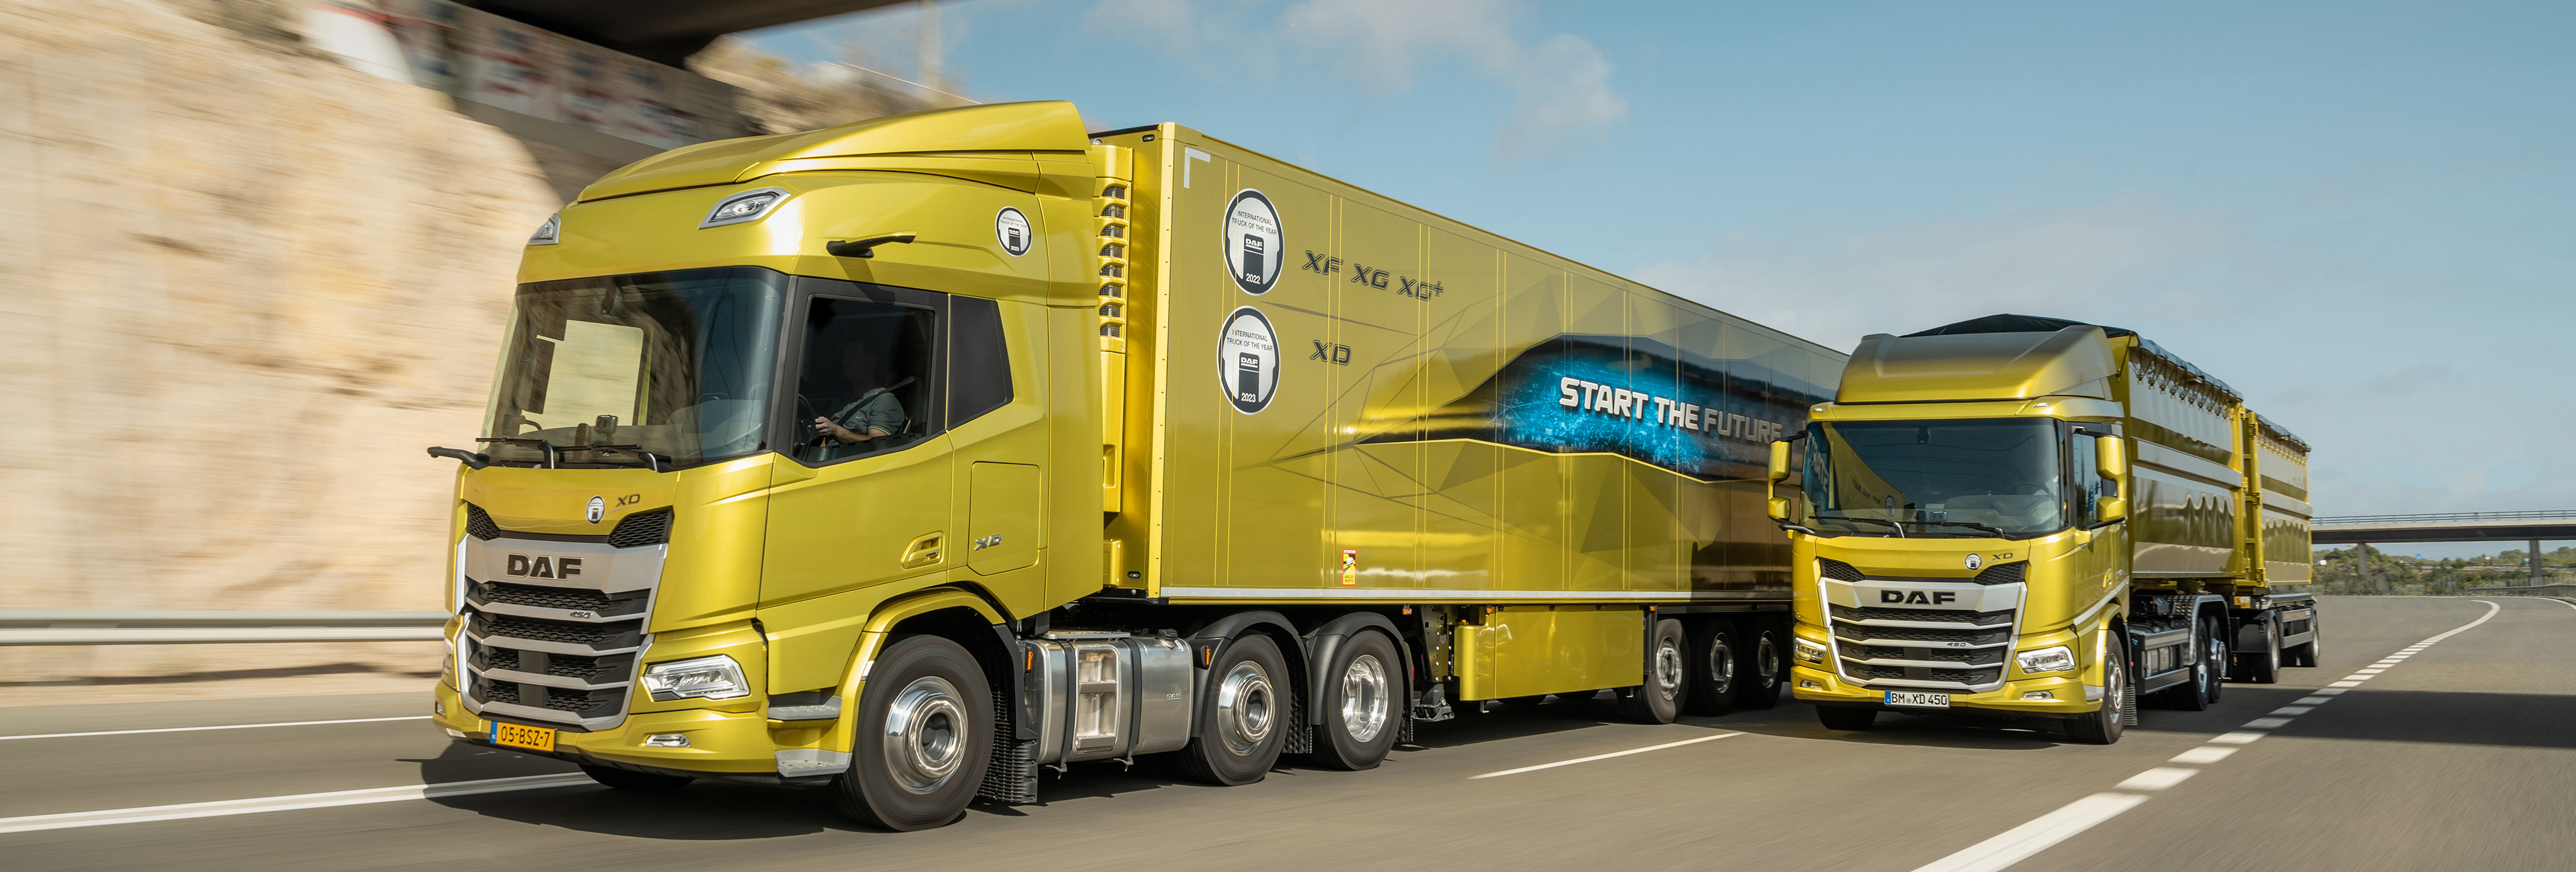 https://www.daf.com/-/media/images/press-releases/product-introductions/2023/safety/01-daf-introduces-full-range-of-enhanced-safety-features-hh.jpg?h=1328&w=3921&rev=b214be6f35784c1898563202c410eb01&hash=1CB453F7AB175B93B1B80C64B0FAC540